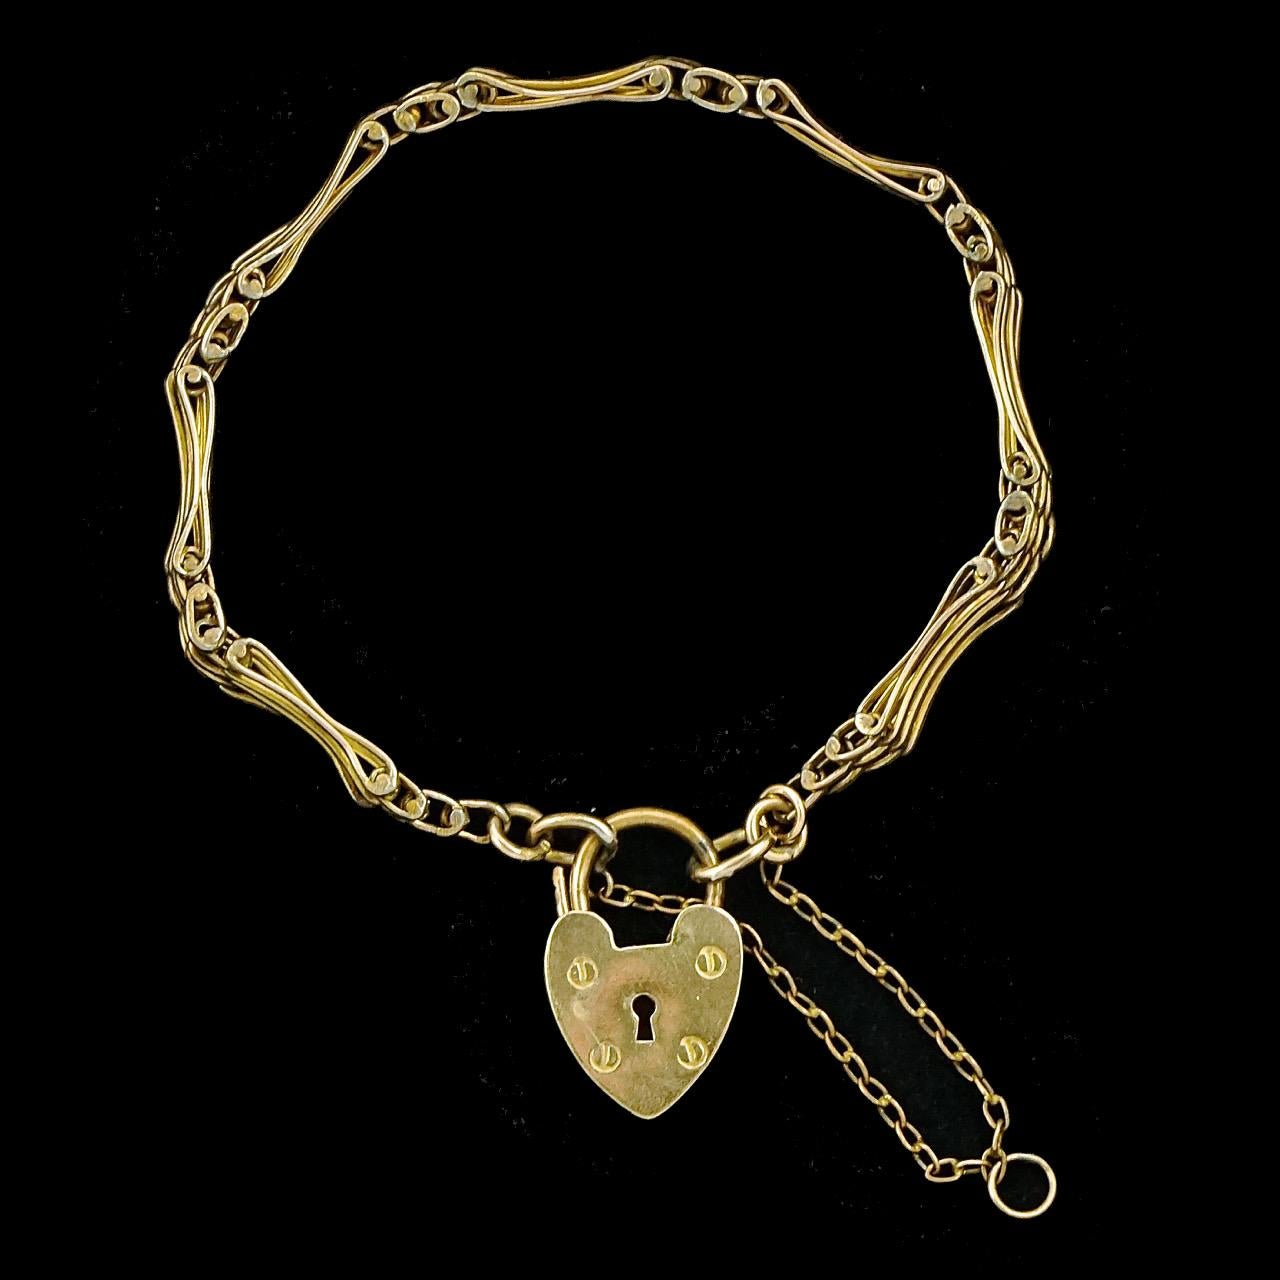 Women's or Men's Antique Rolled Rose Gold Gate Link Bracelet with Heart Clasp and Safety Chain